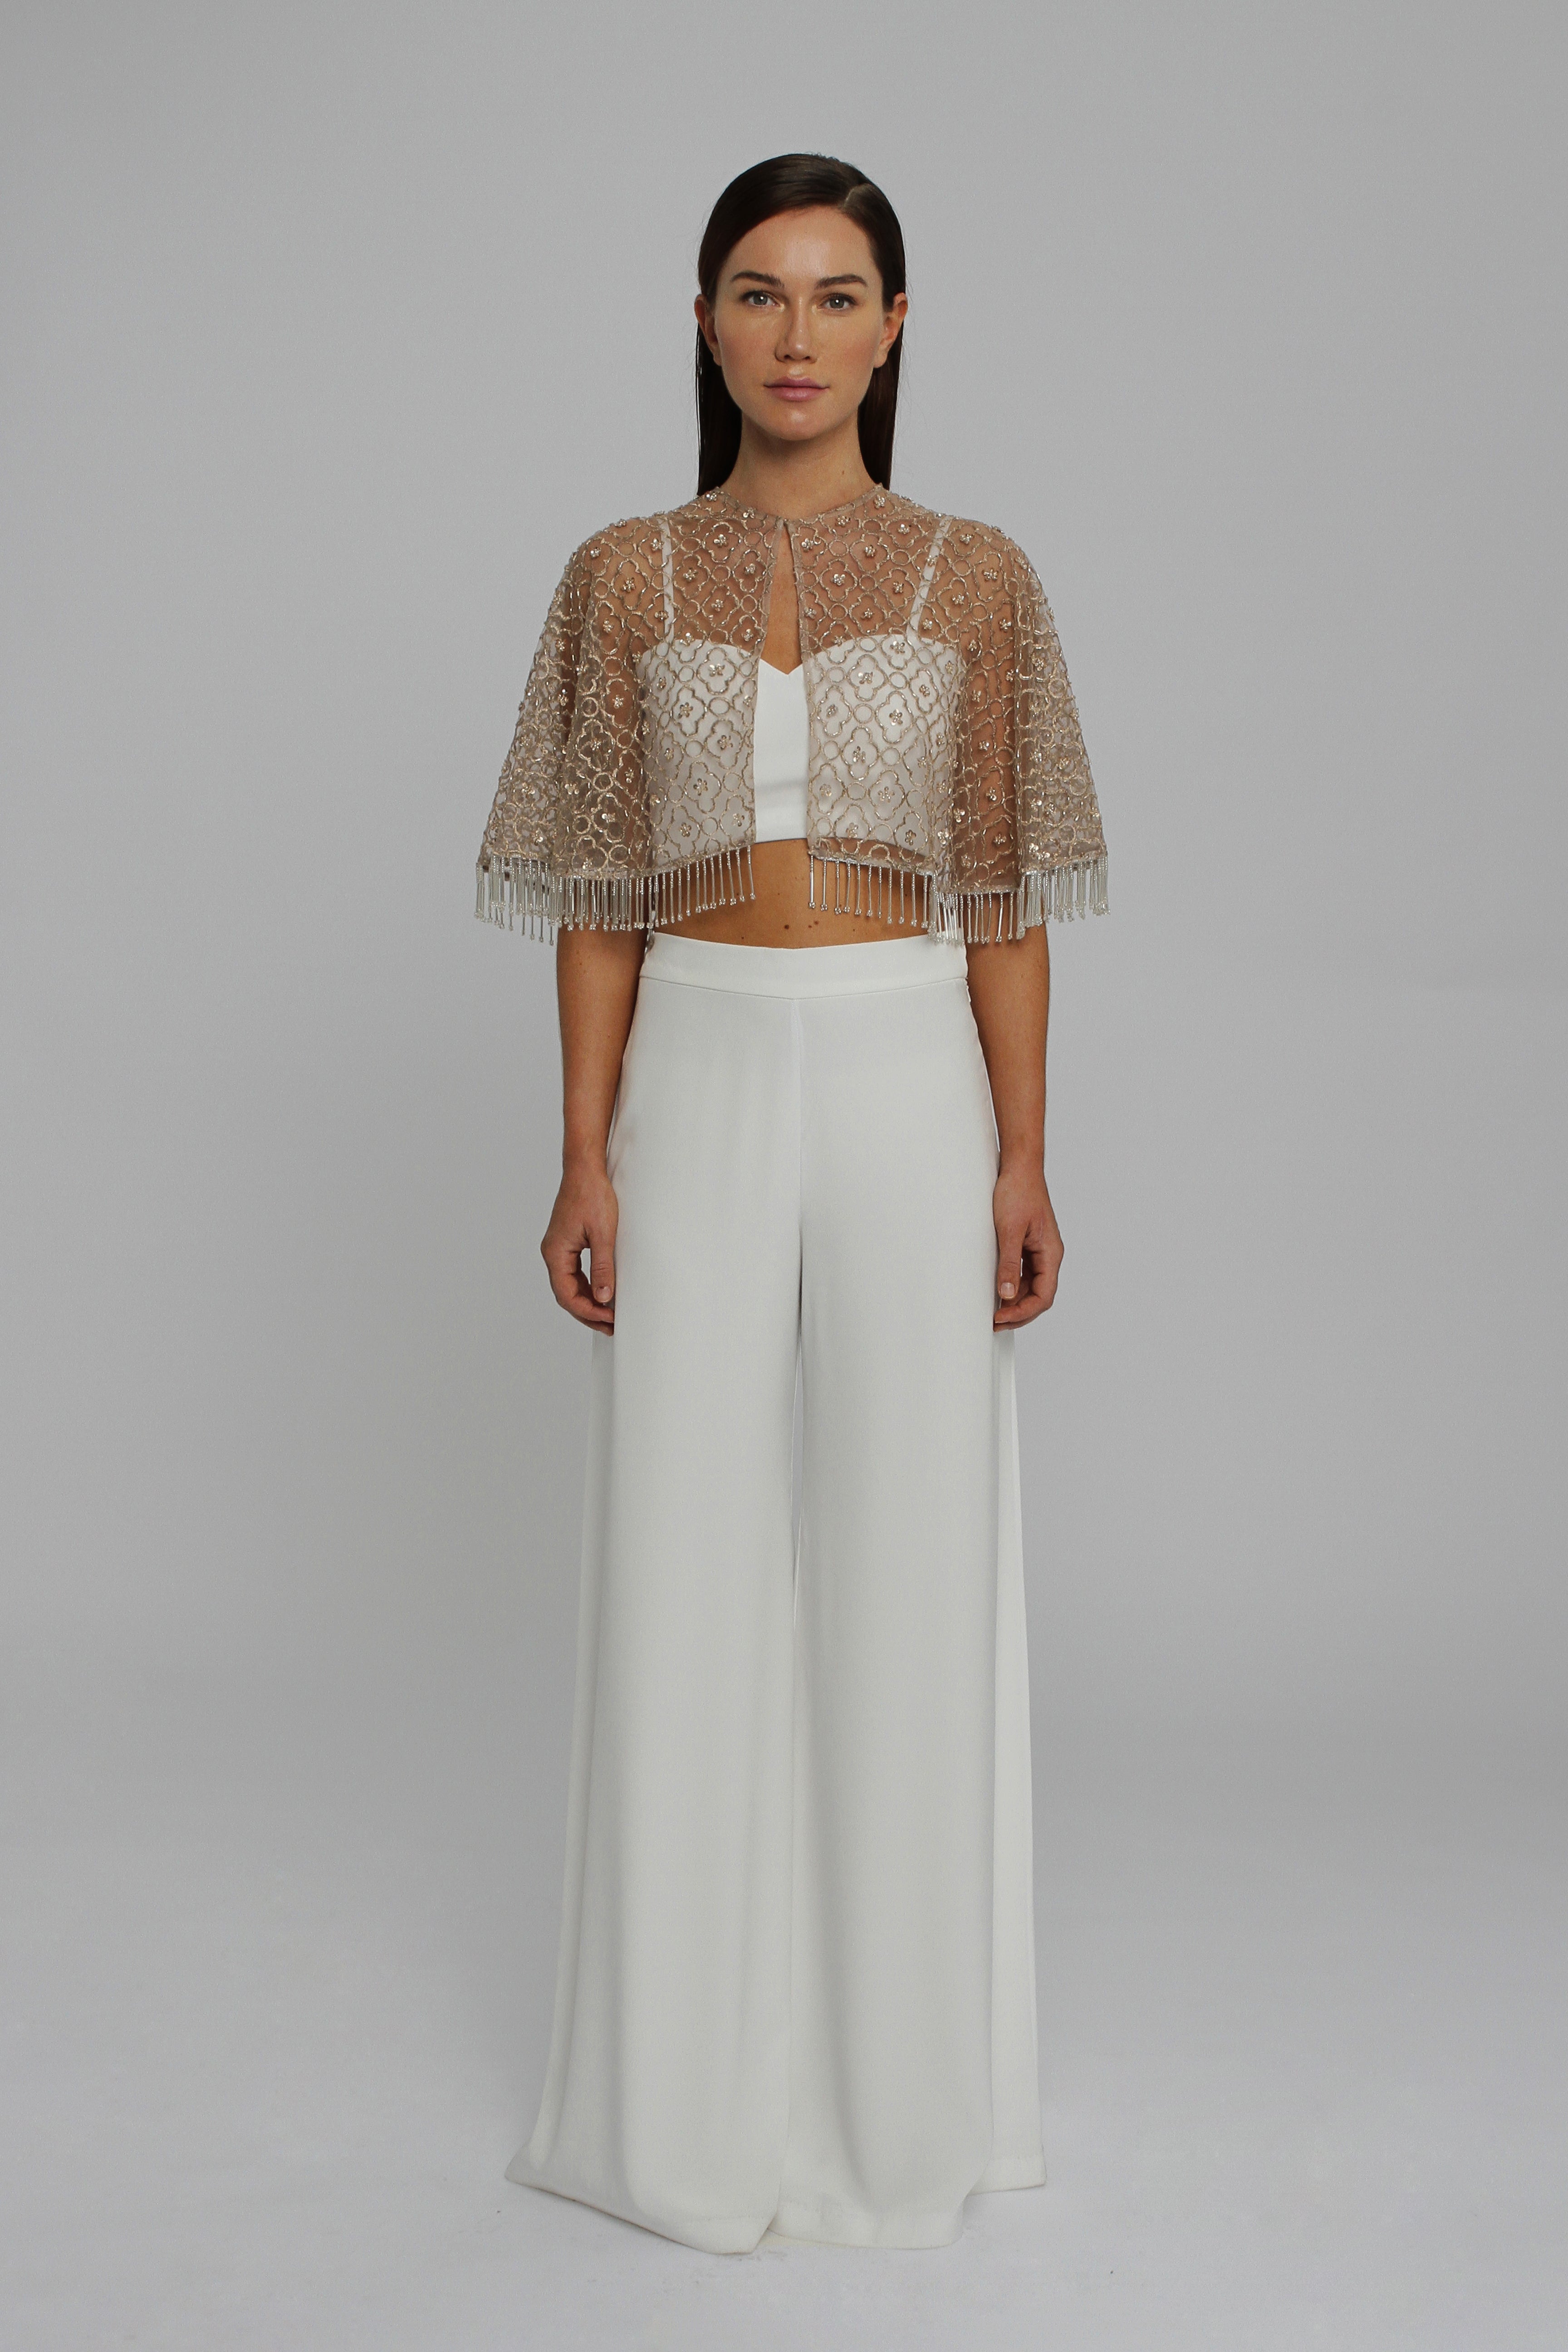 Embellished Bolero with Blush Crop Top and Evening Palazzo Trouser UME London Cape Evening Outfits London